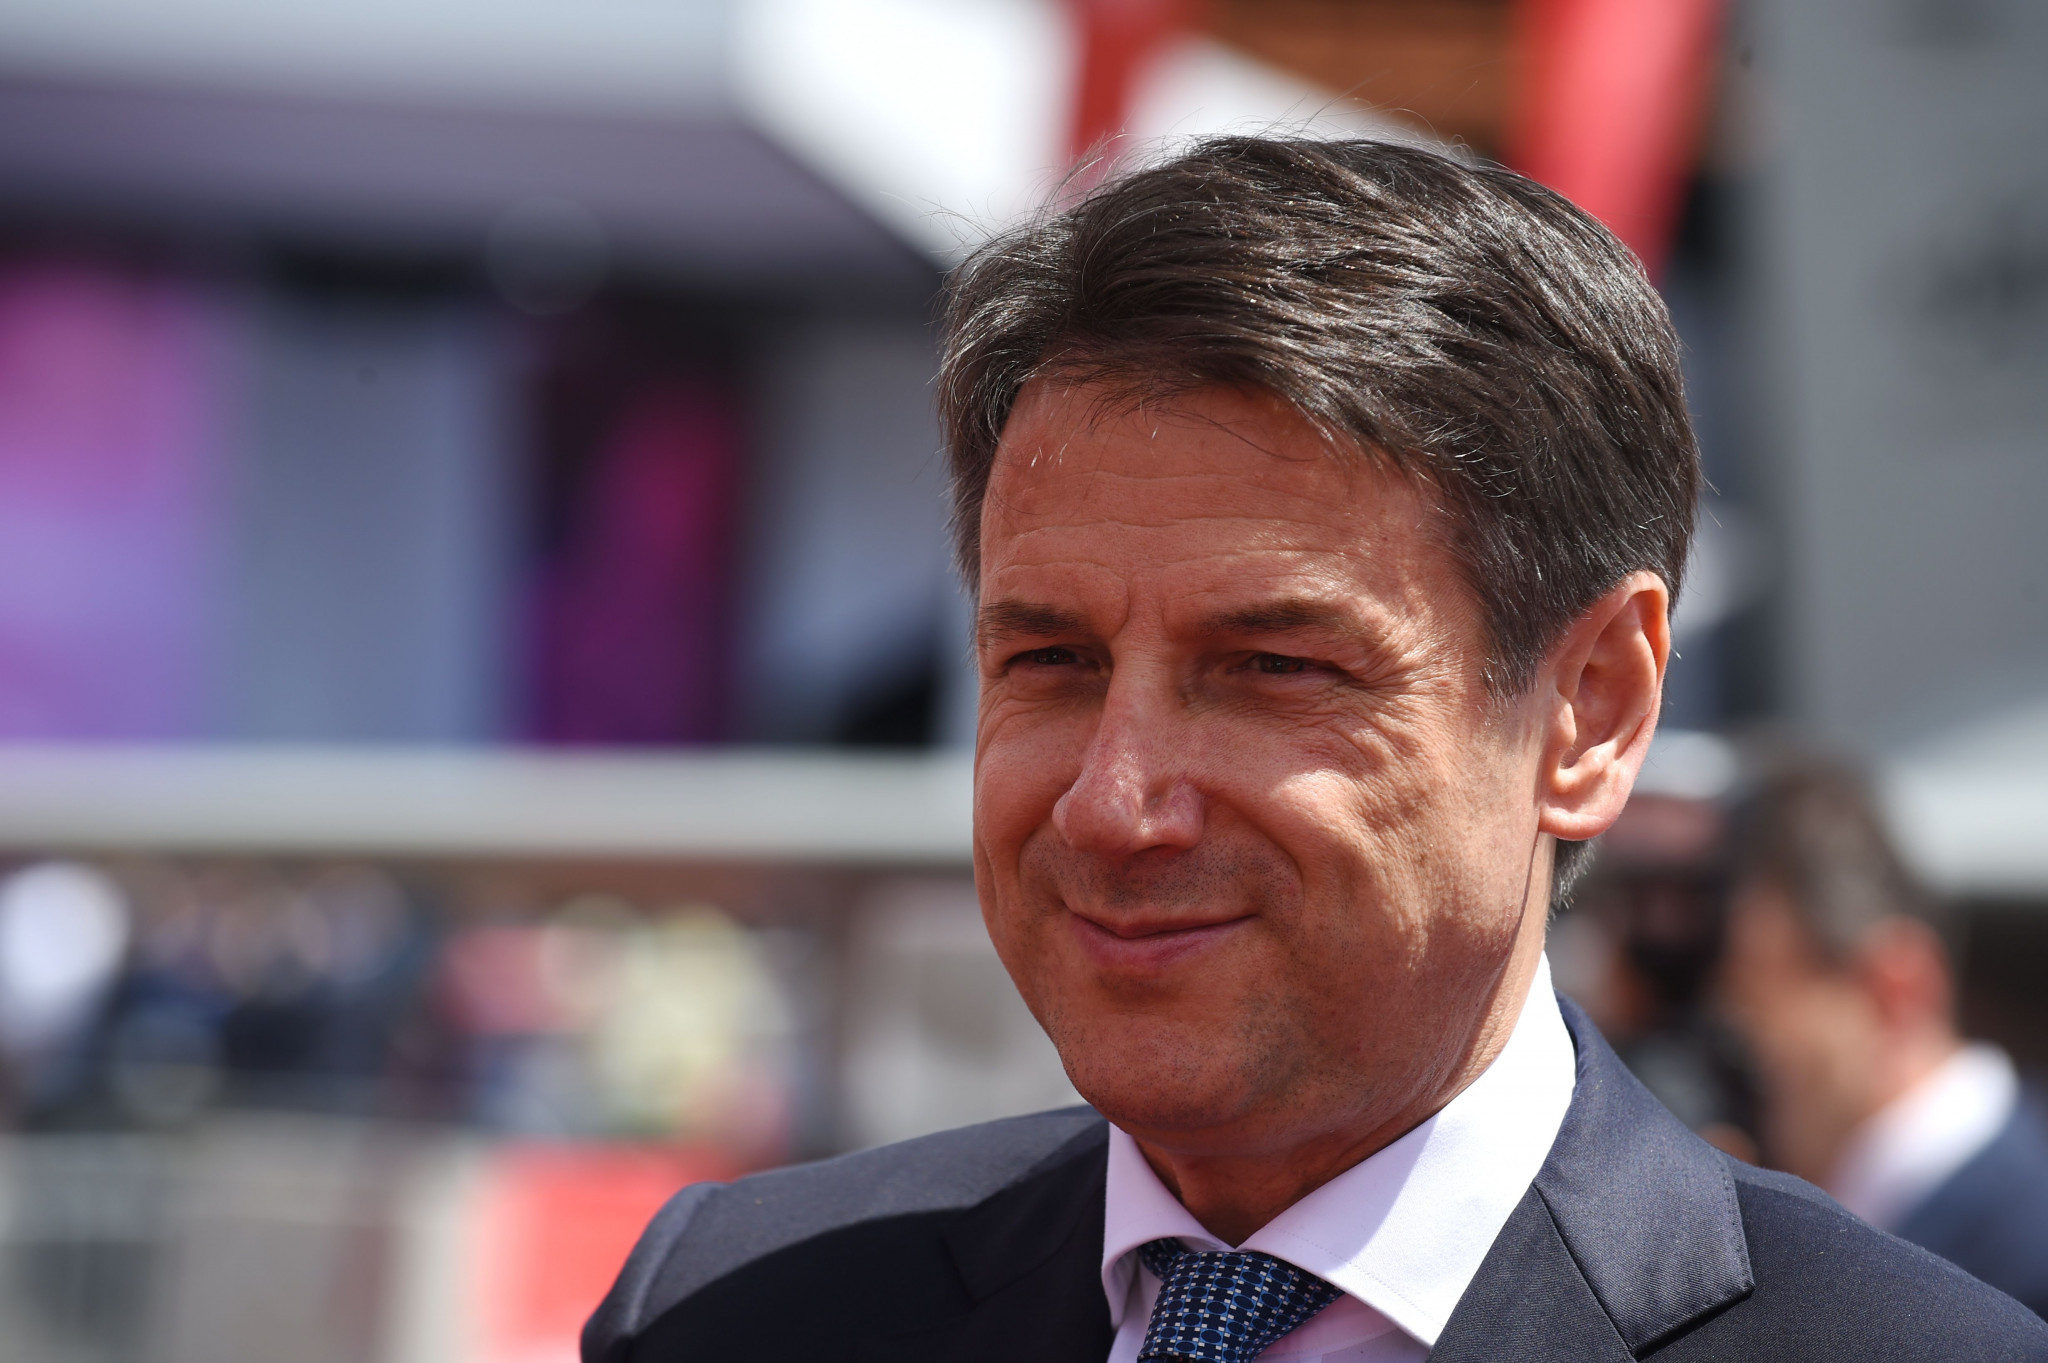 Giuseppe Conte will attend the IOC Session on Monday ©Getty Images